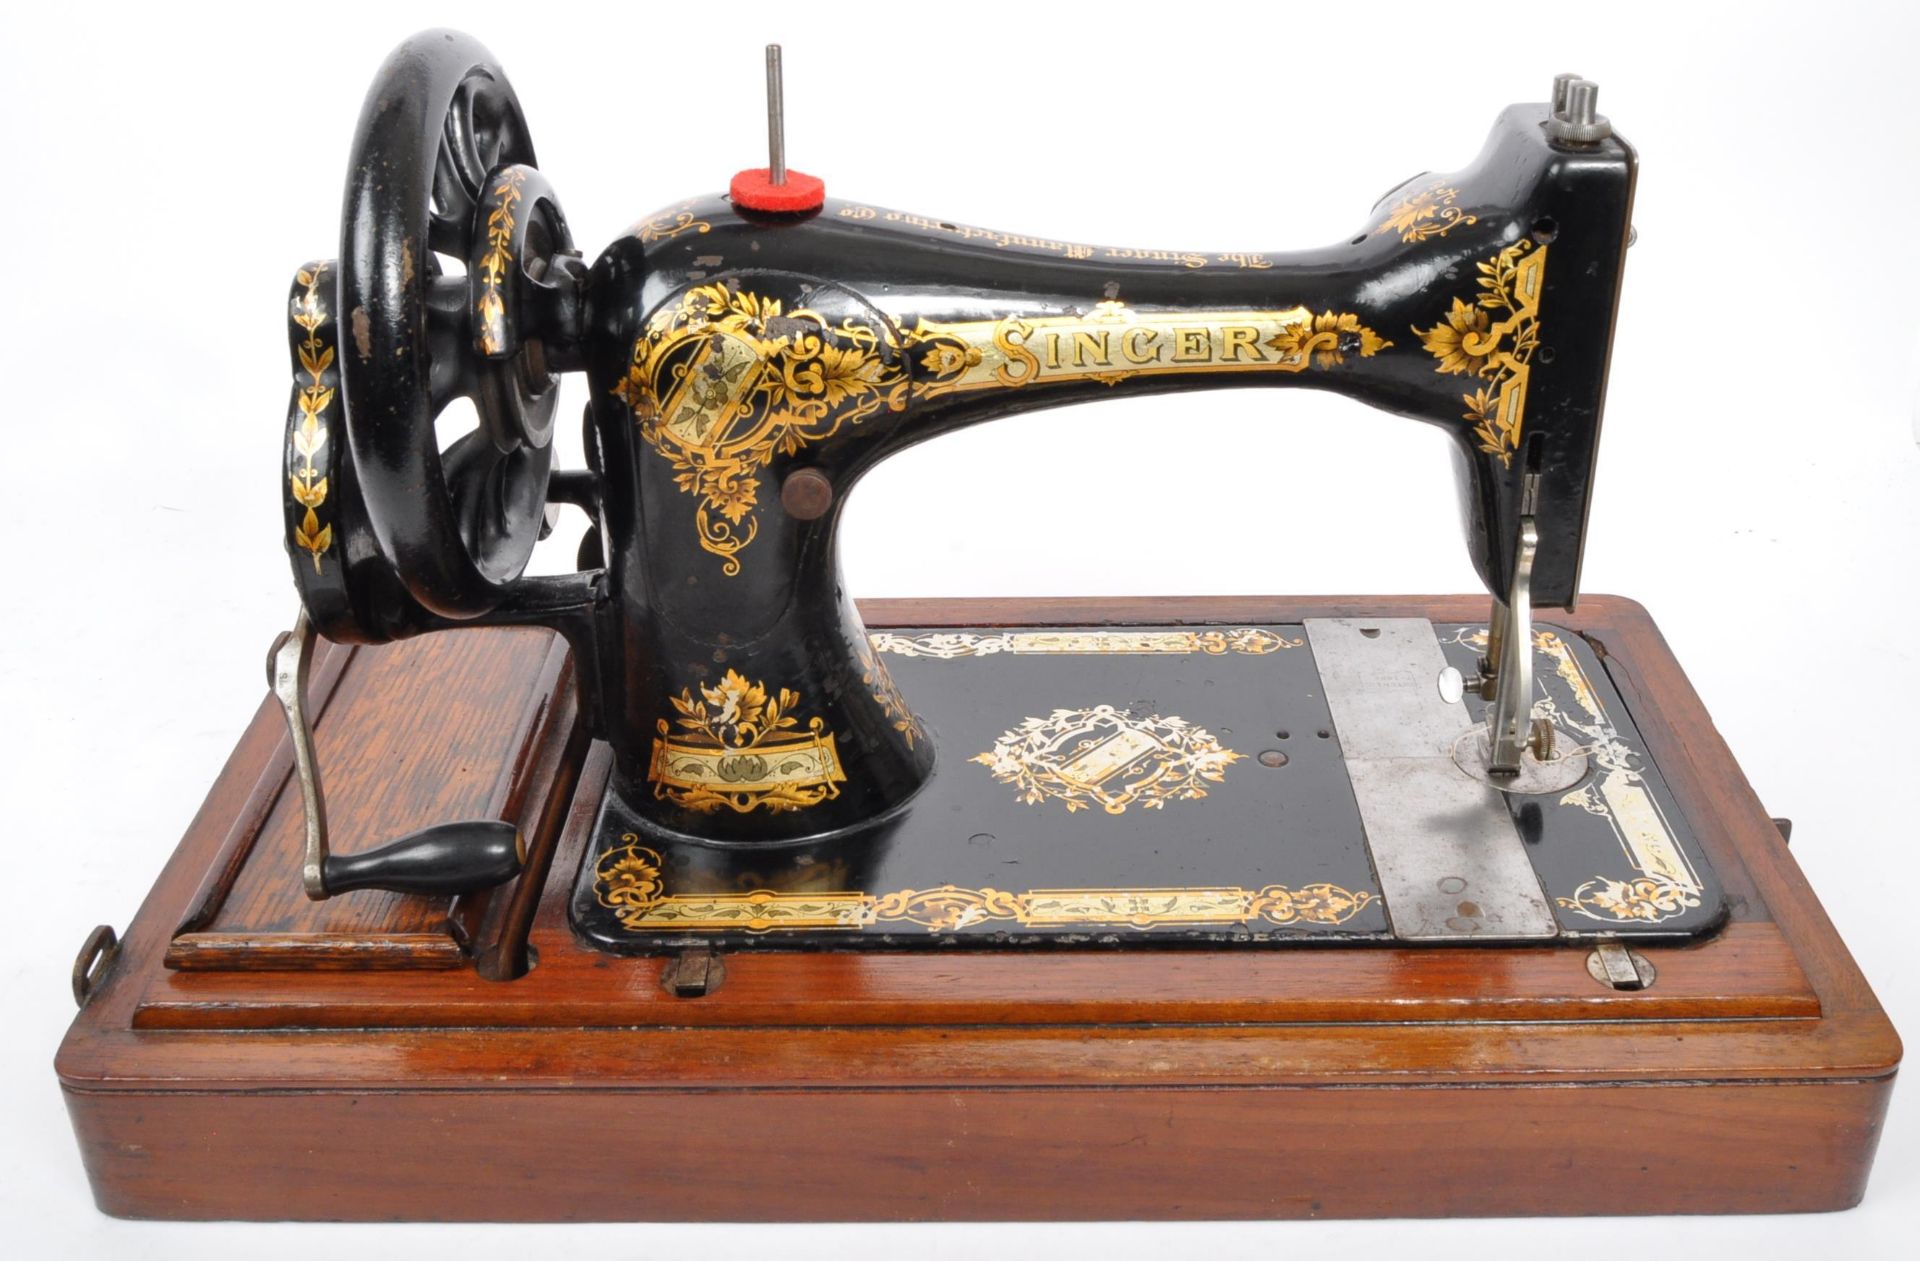 TWO EARLY 20TH CENTURY SEWING MACHINES - SINGER - Image 5 of 8